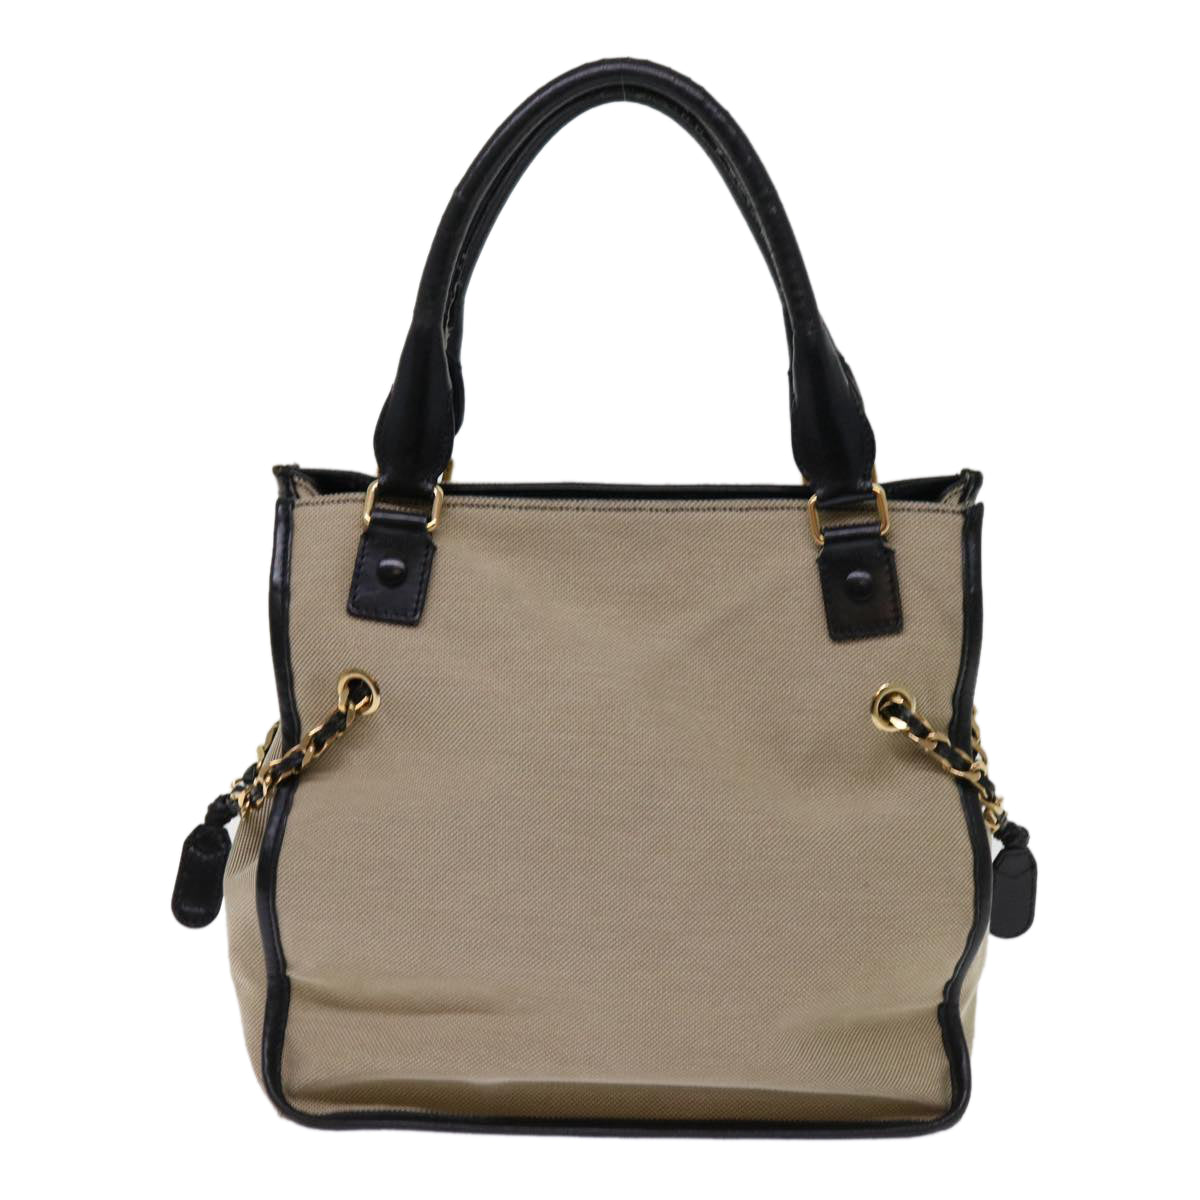 Chloe Harley Hand Bag Canvas Leather Beige Auth fm3111 - 0